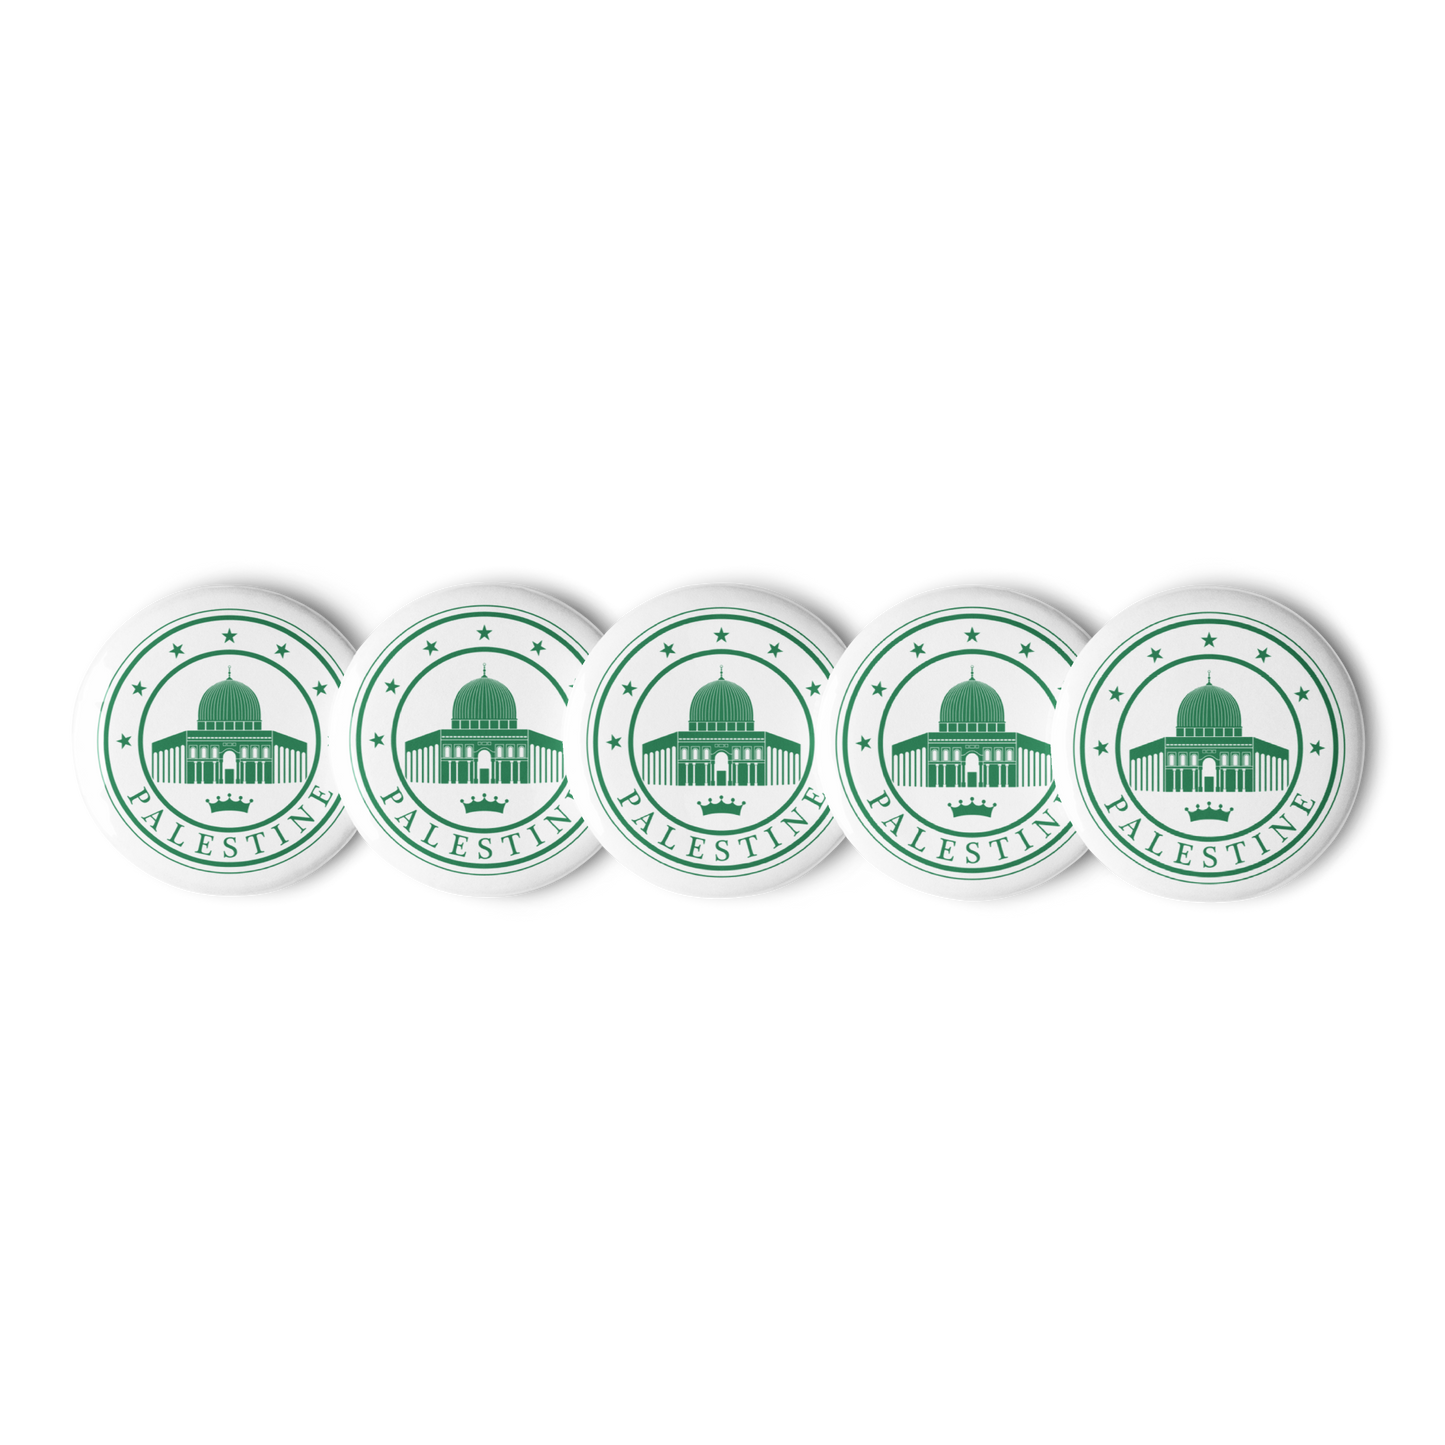 PIN Buttons (Set of 5) - PALESTINE